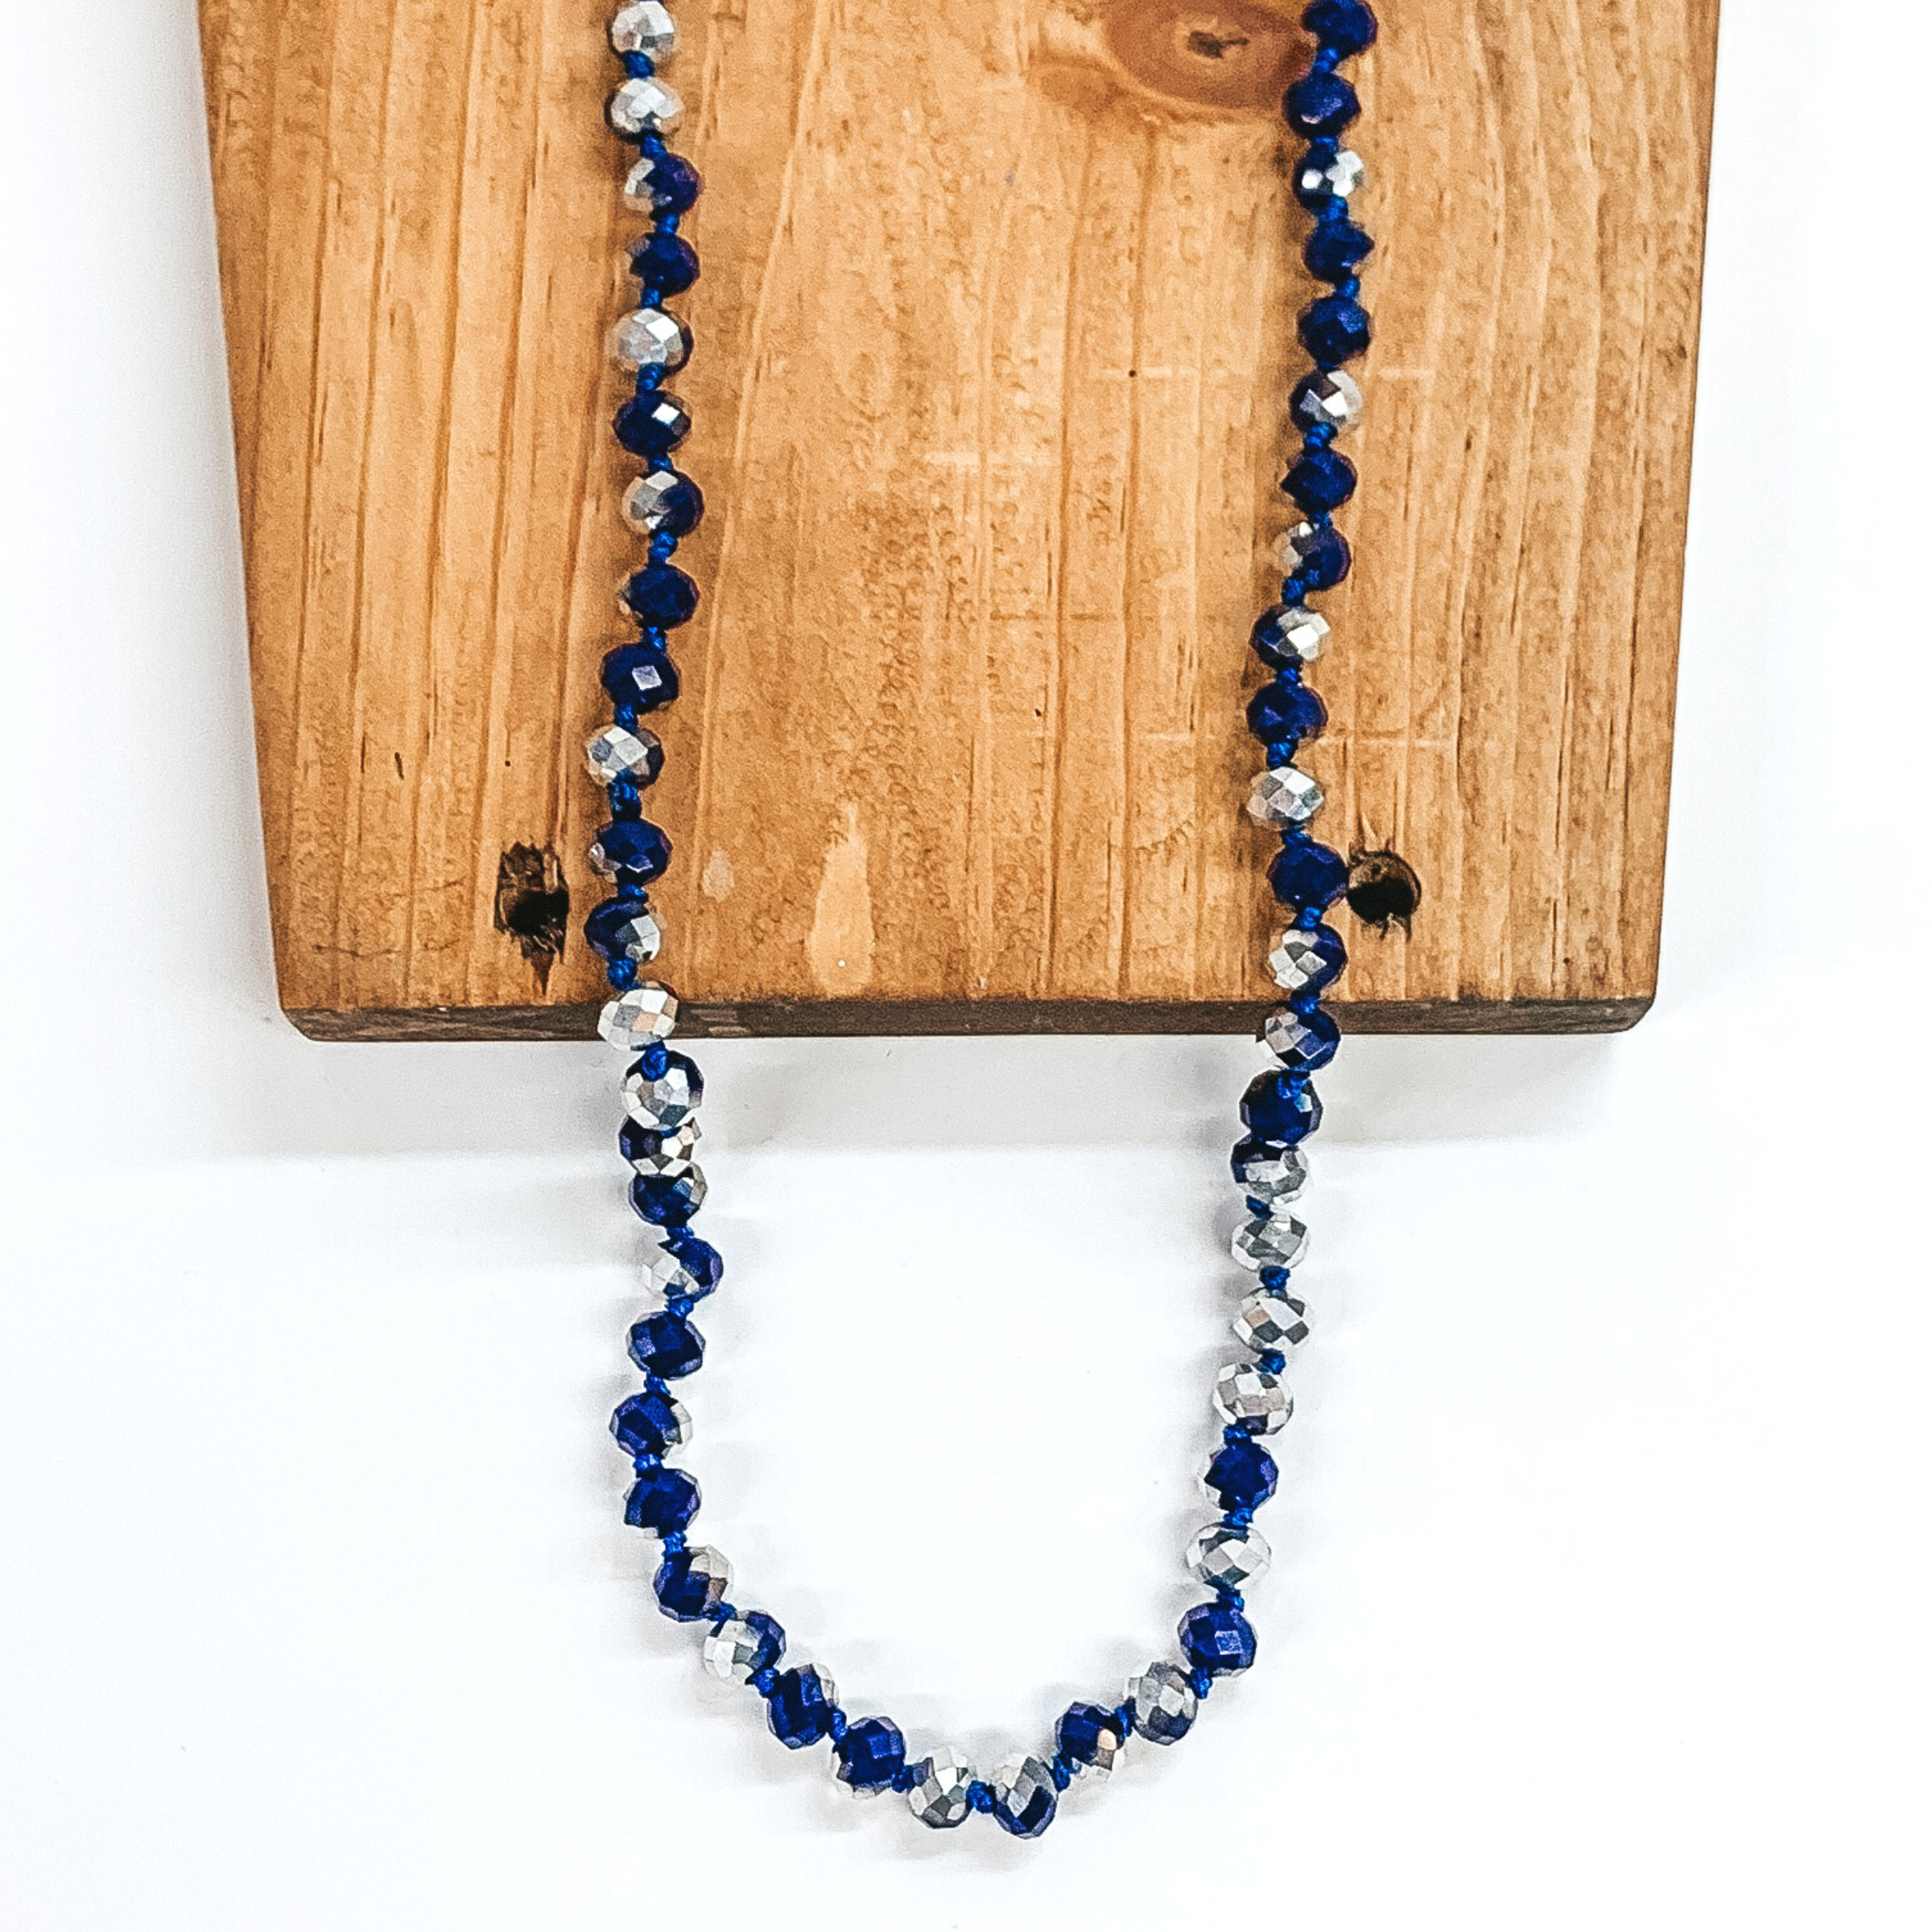 Blue and silver crystal beaded necklace. This necklace is laying on top of a brown block on a white background.